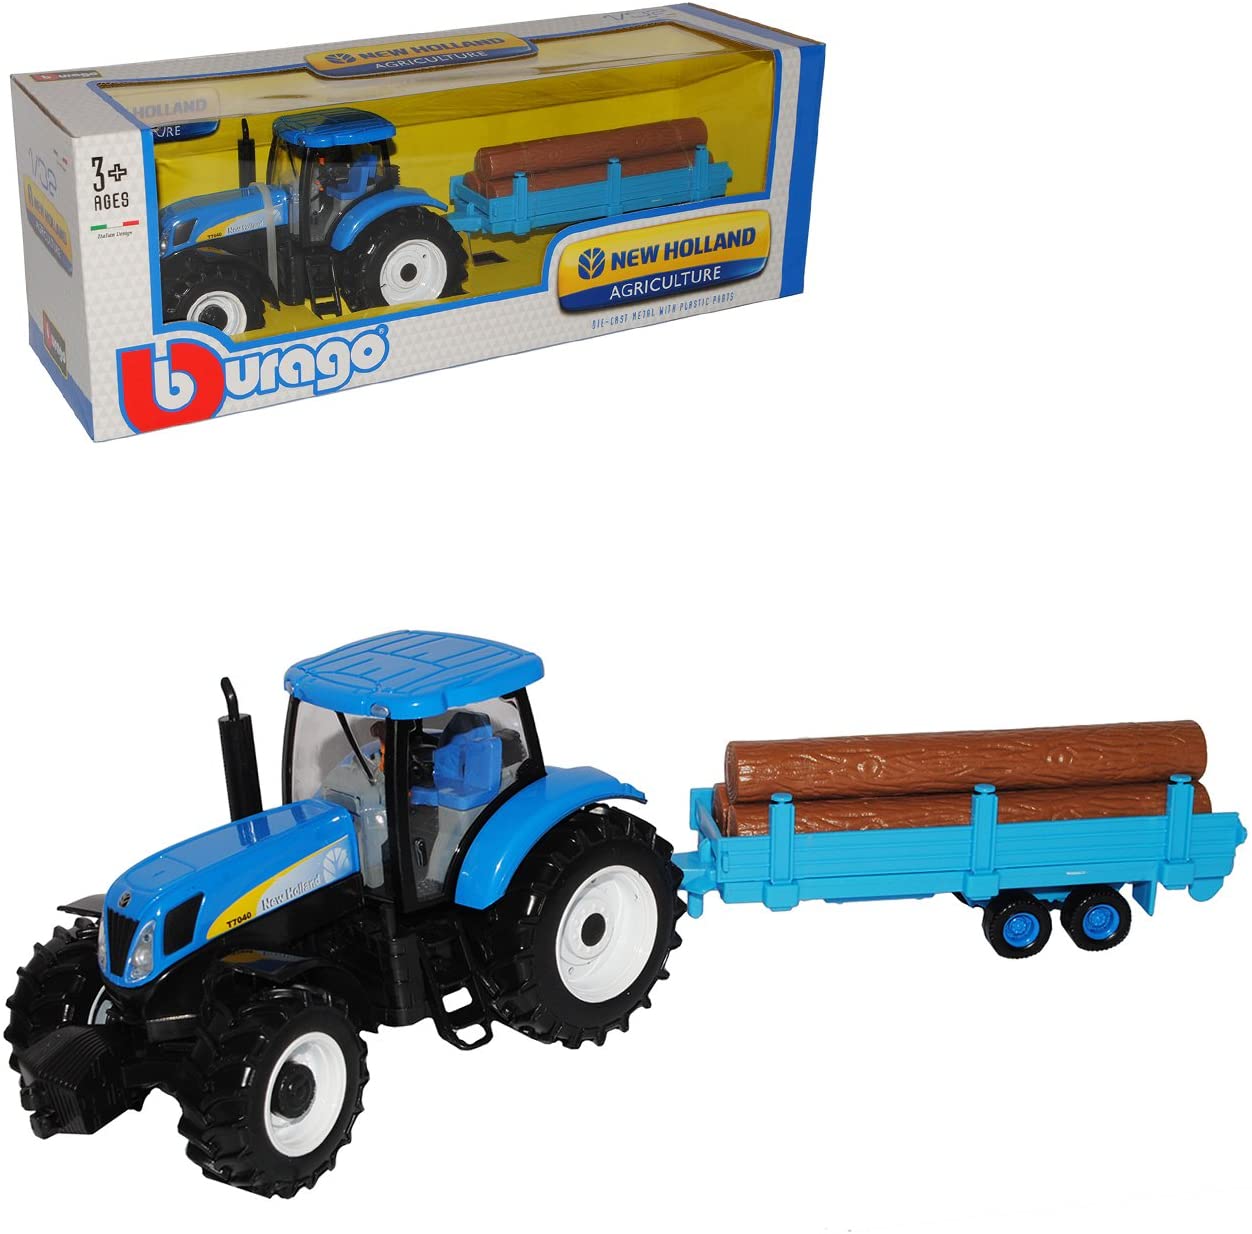 New Holland T7040 Tractor With Wooden Hangers Agriculture Blau 1/32 Bburago